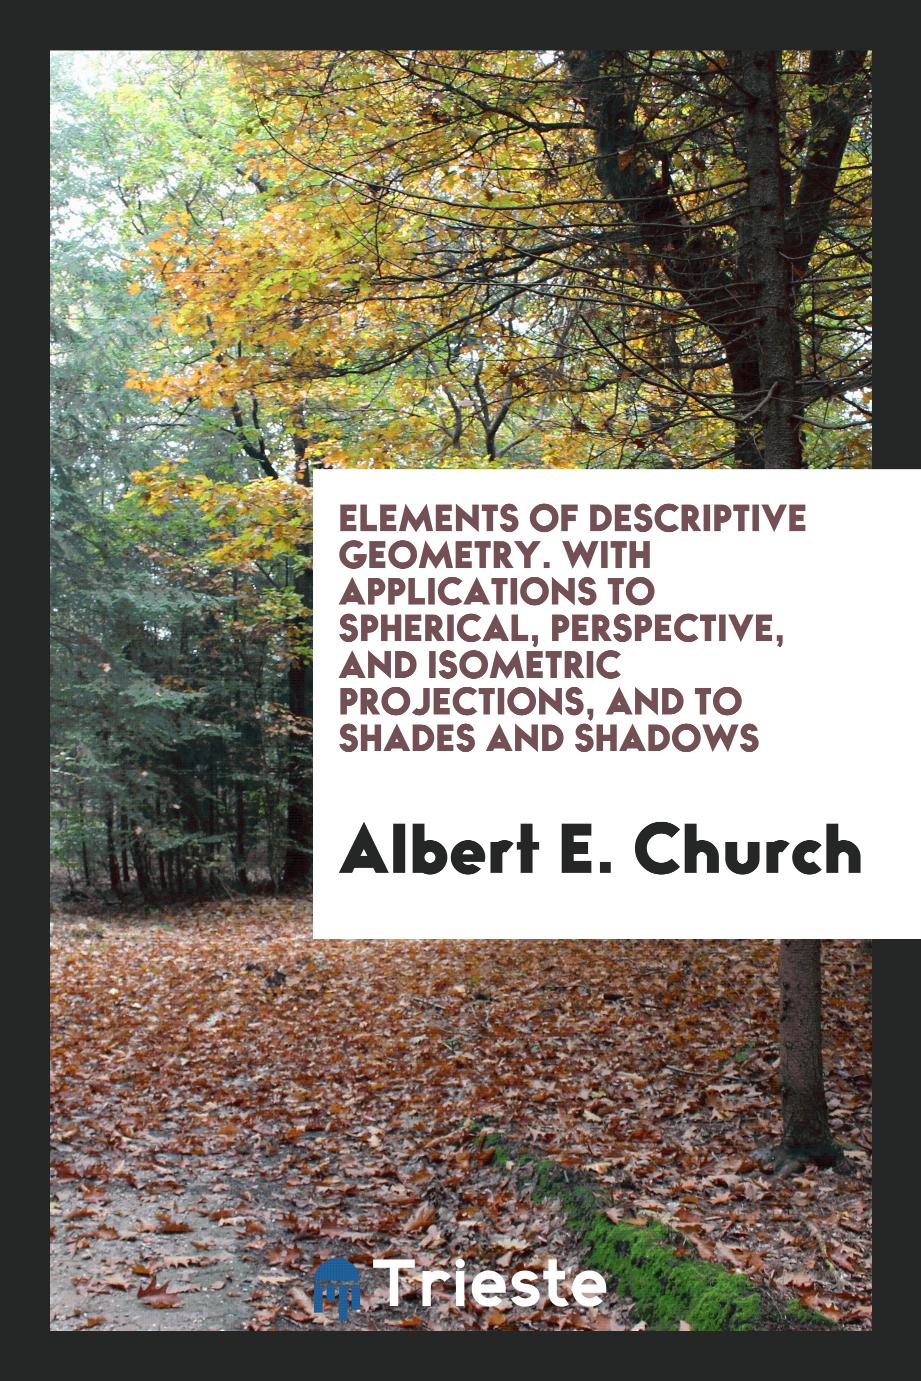 Elements of Descriptive Geometry. With Applications to Spherical, Perspective, and Isometric Projections, and to Shades and Shadows